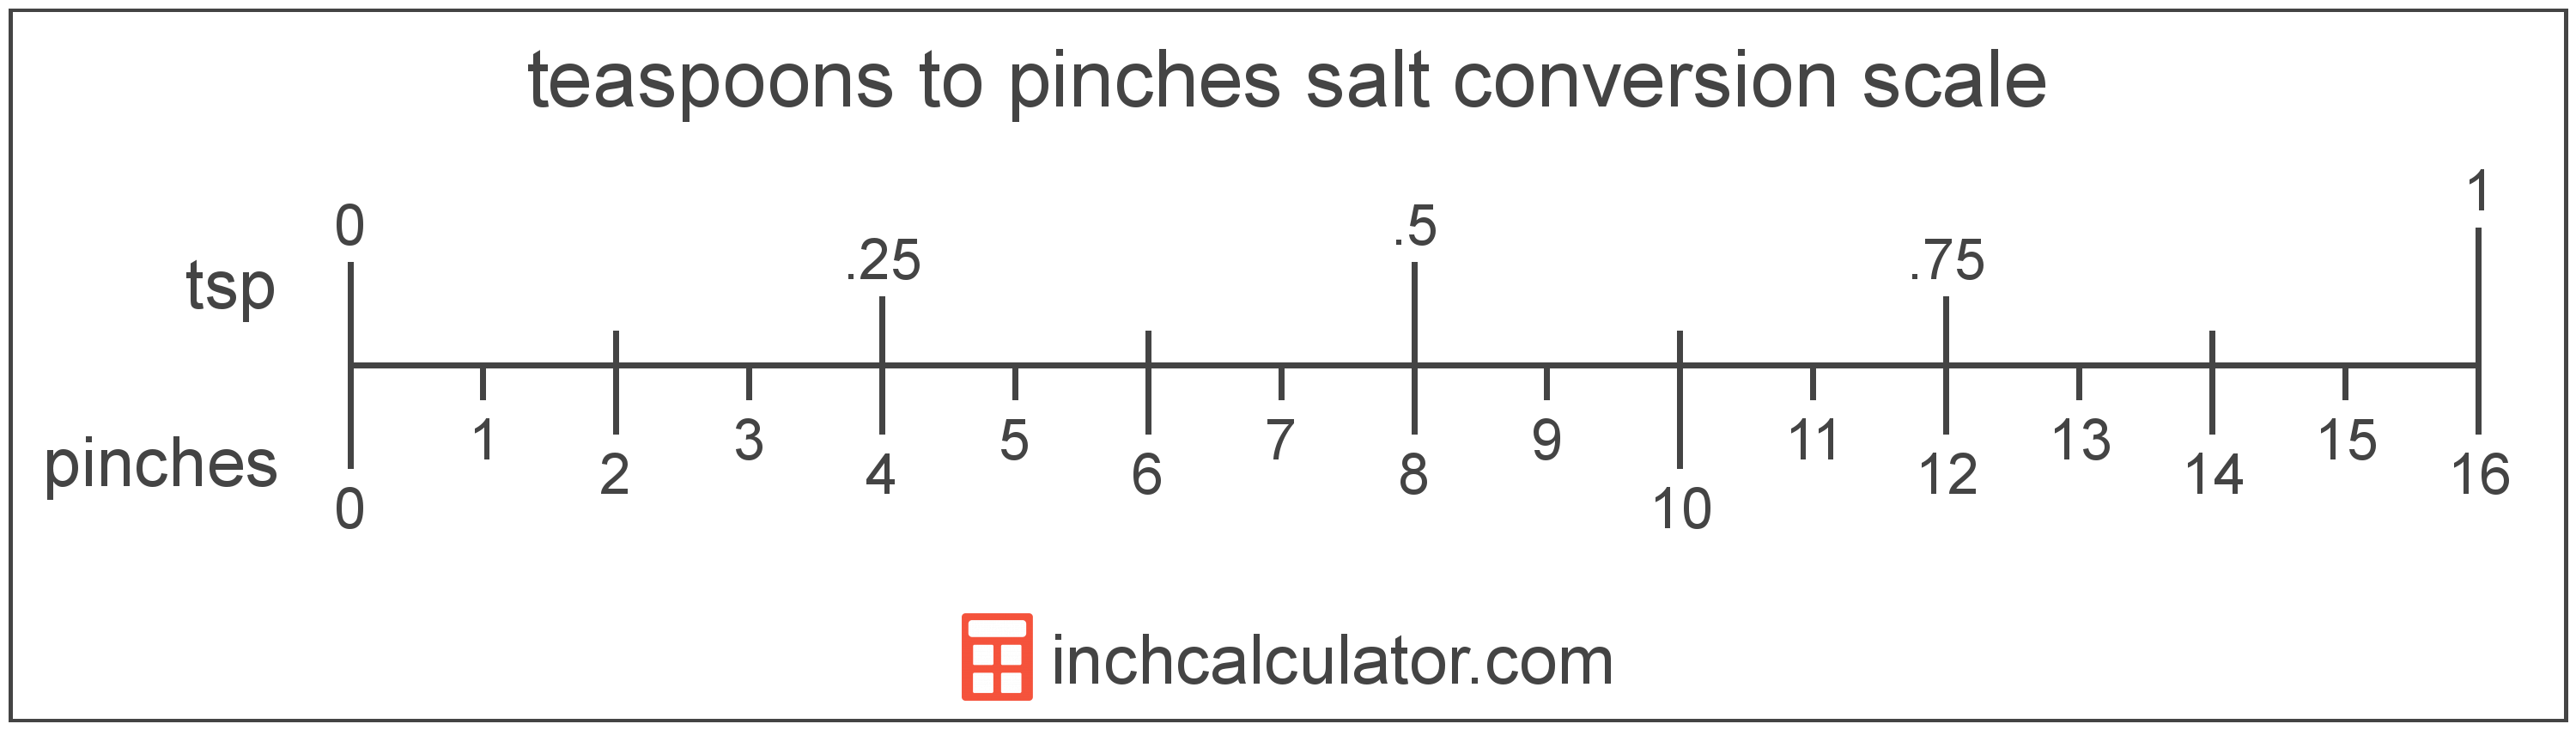 conversion scale showing pinches and equivalent teaspoons salt volume values